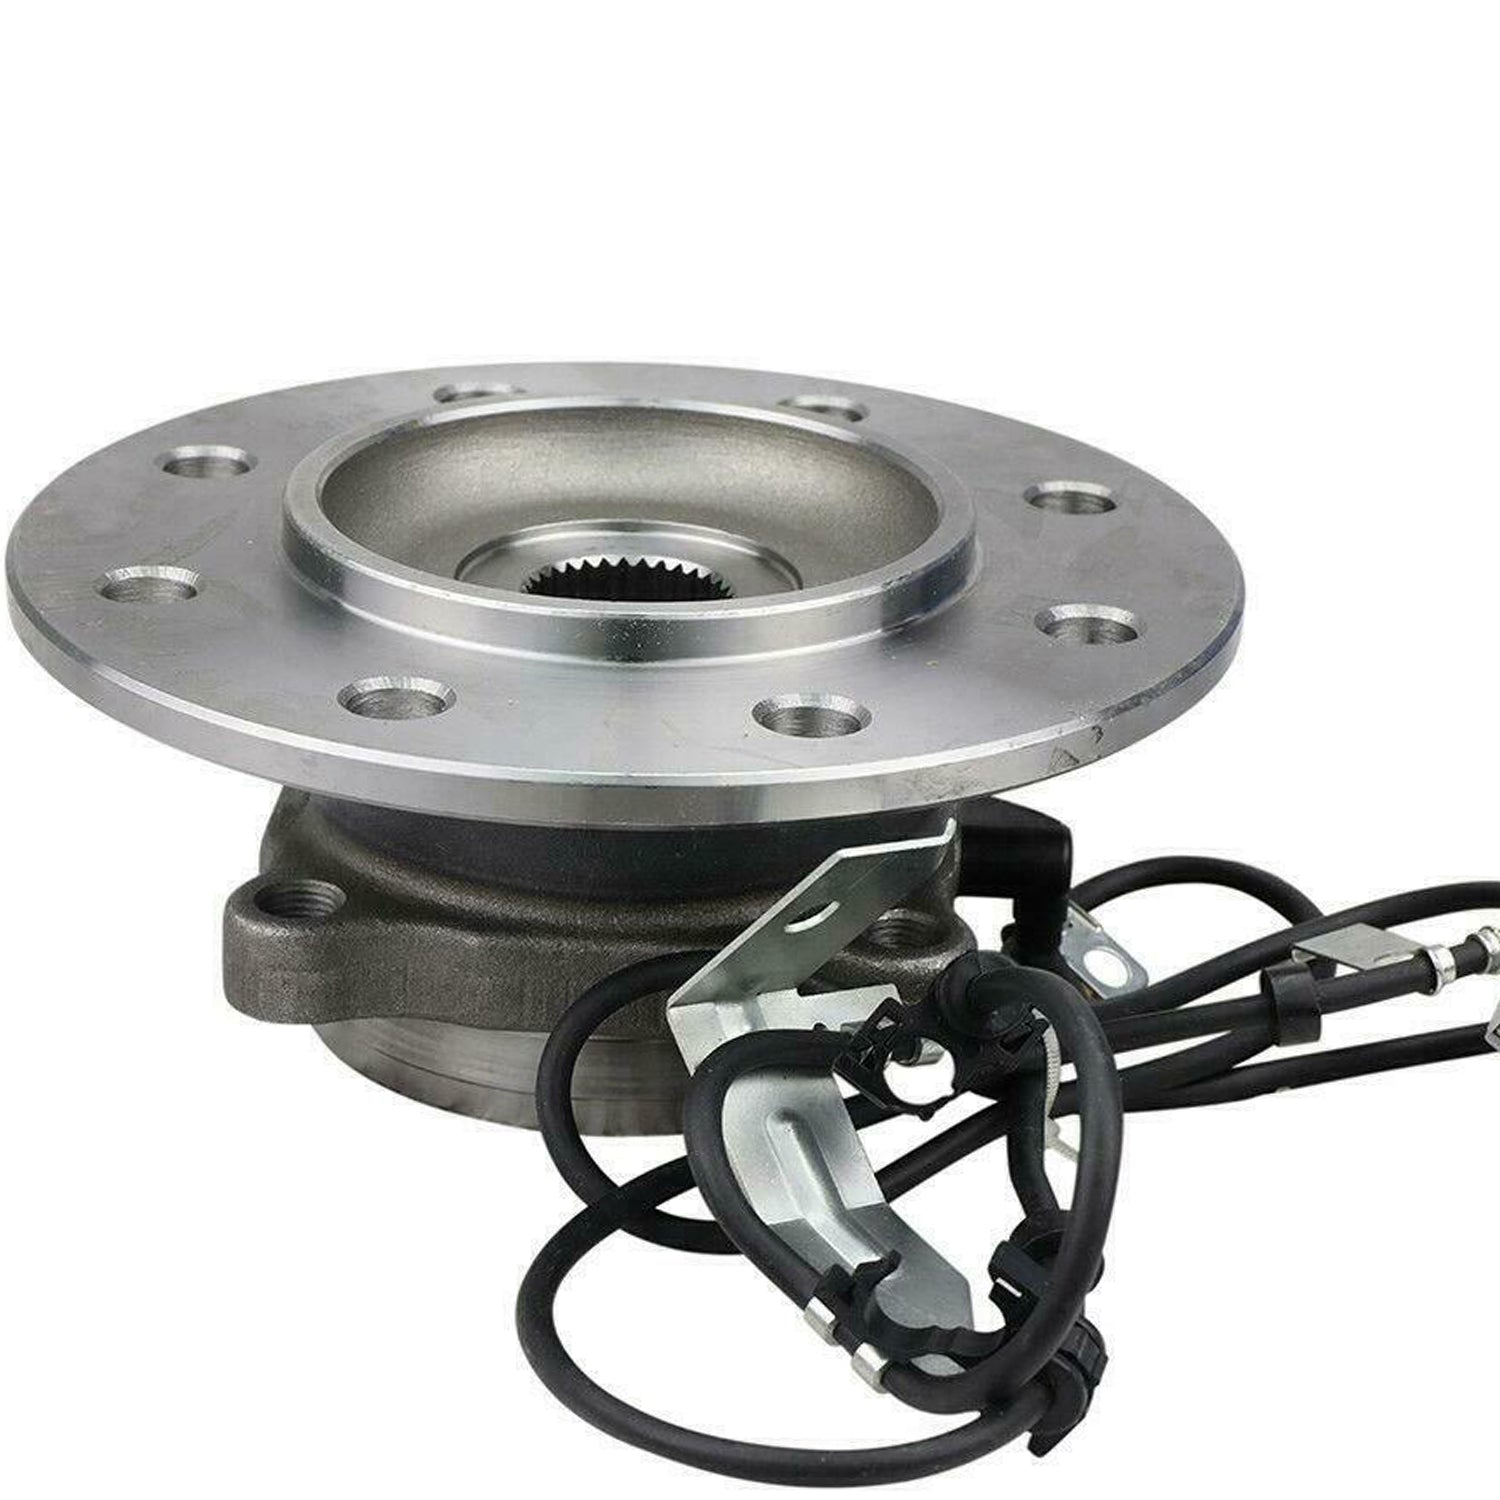 JADODE 515068 Wheel Bearing & Hub Assembly Front Driver for 98 99 Dodge Ram 3500 DRW